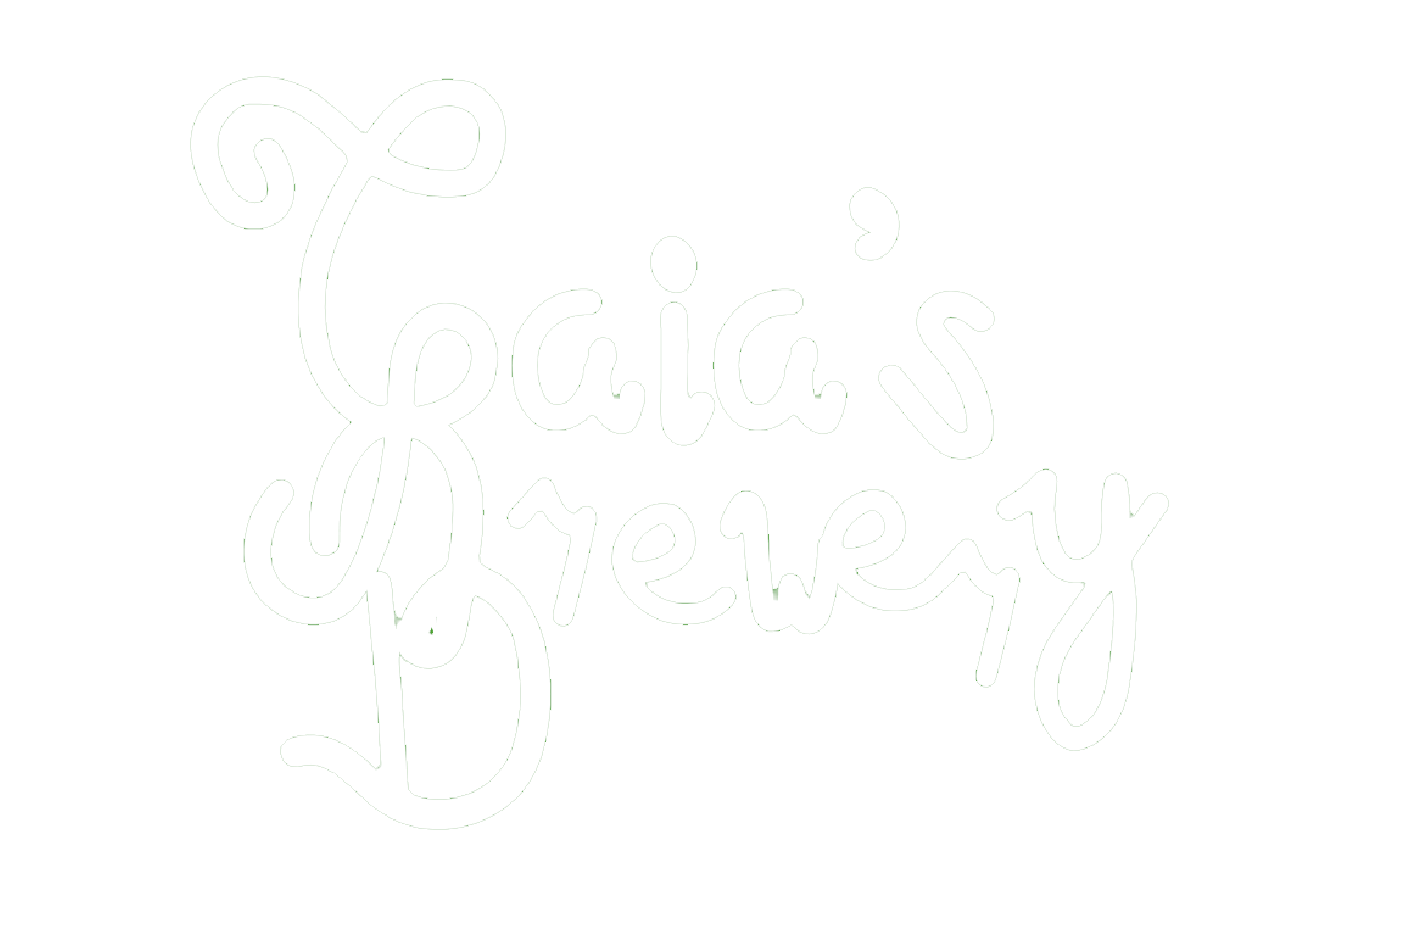 Gaia's Brewery